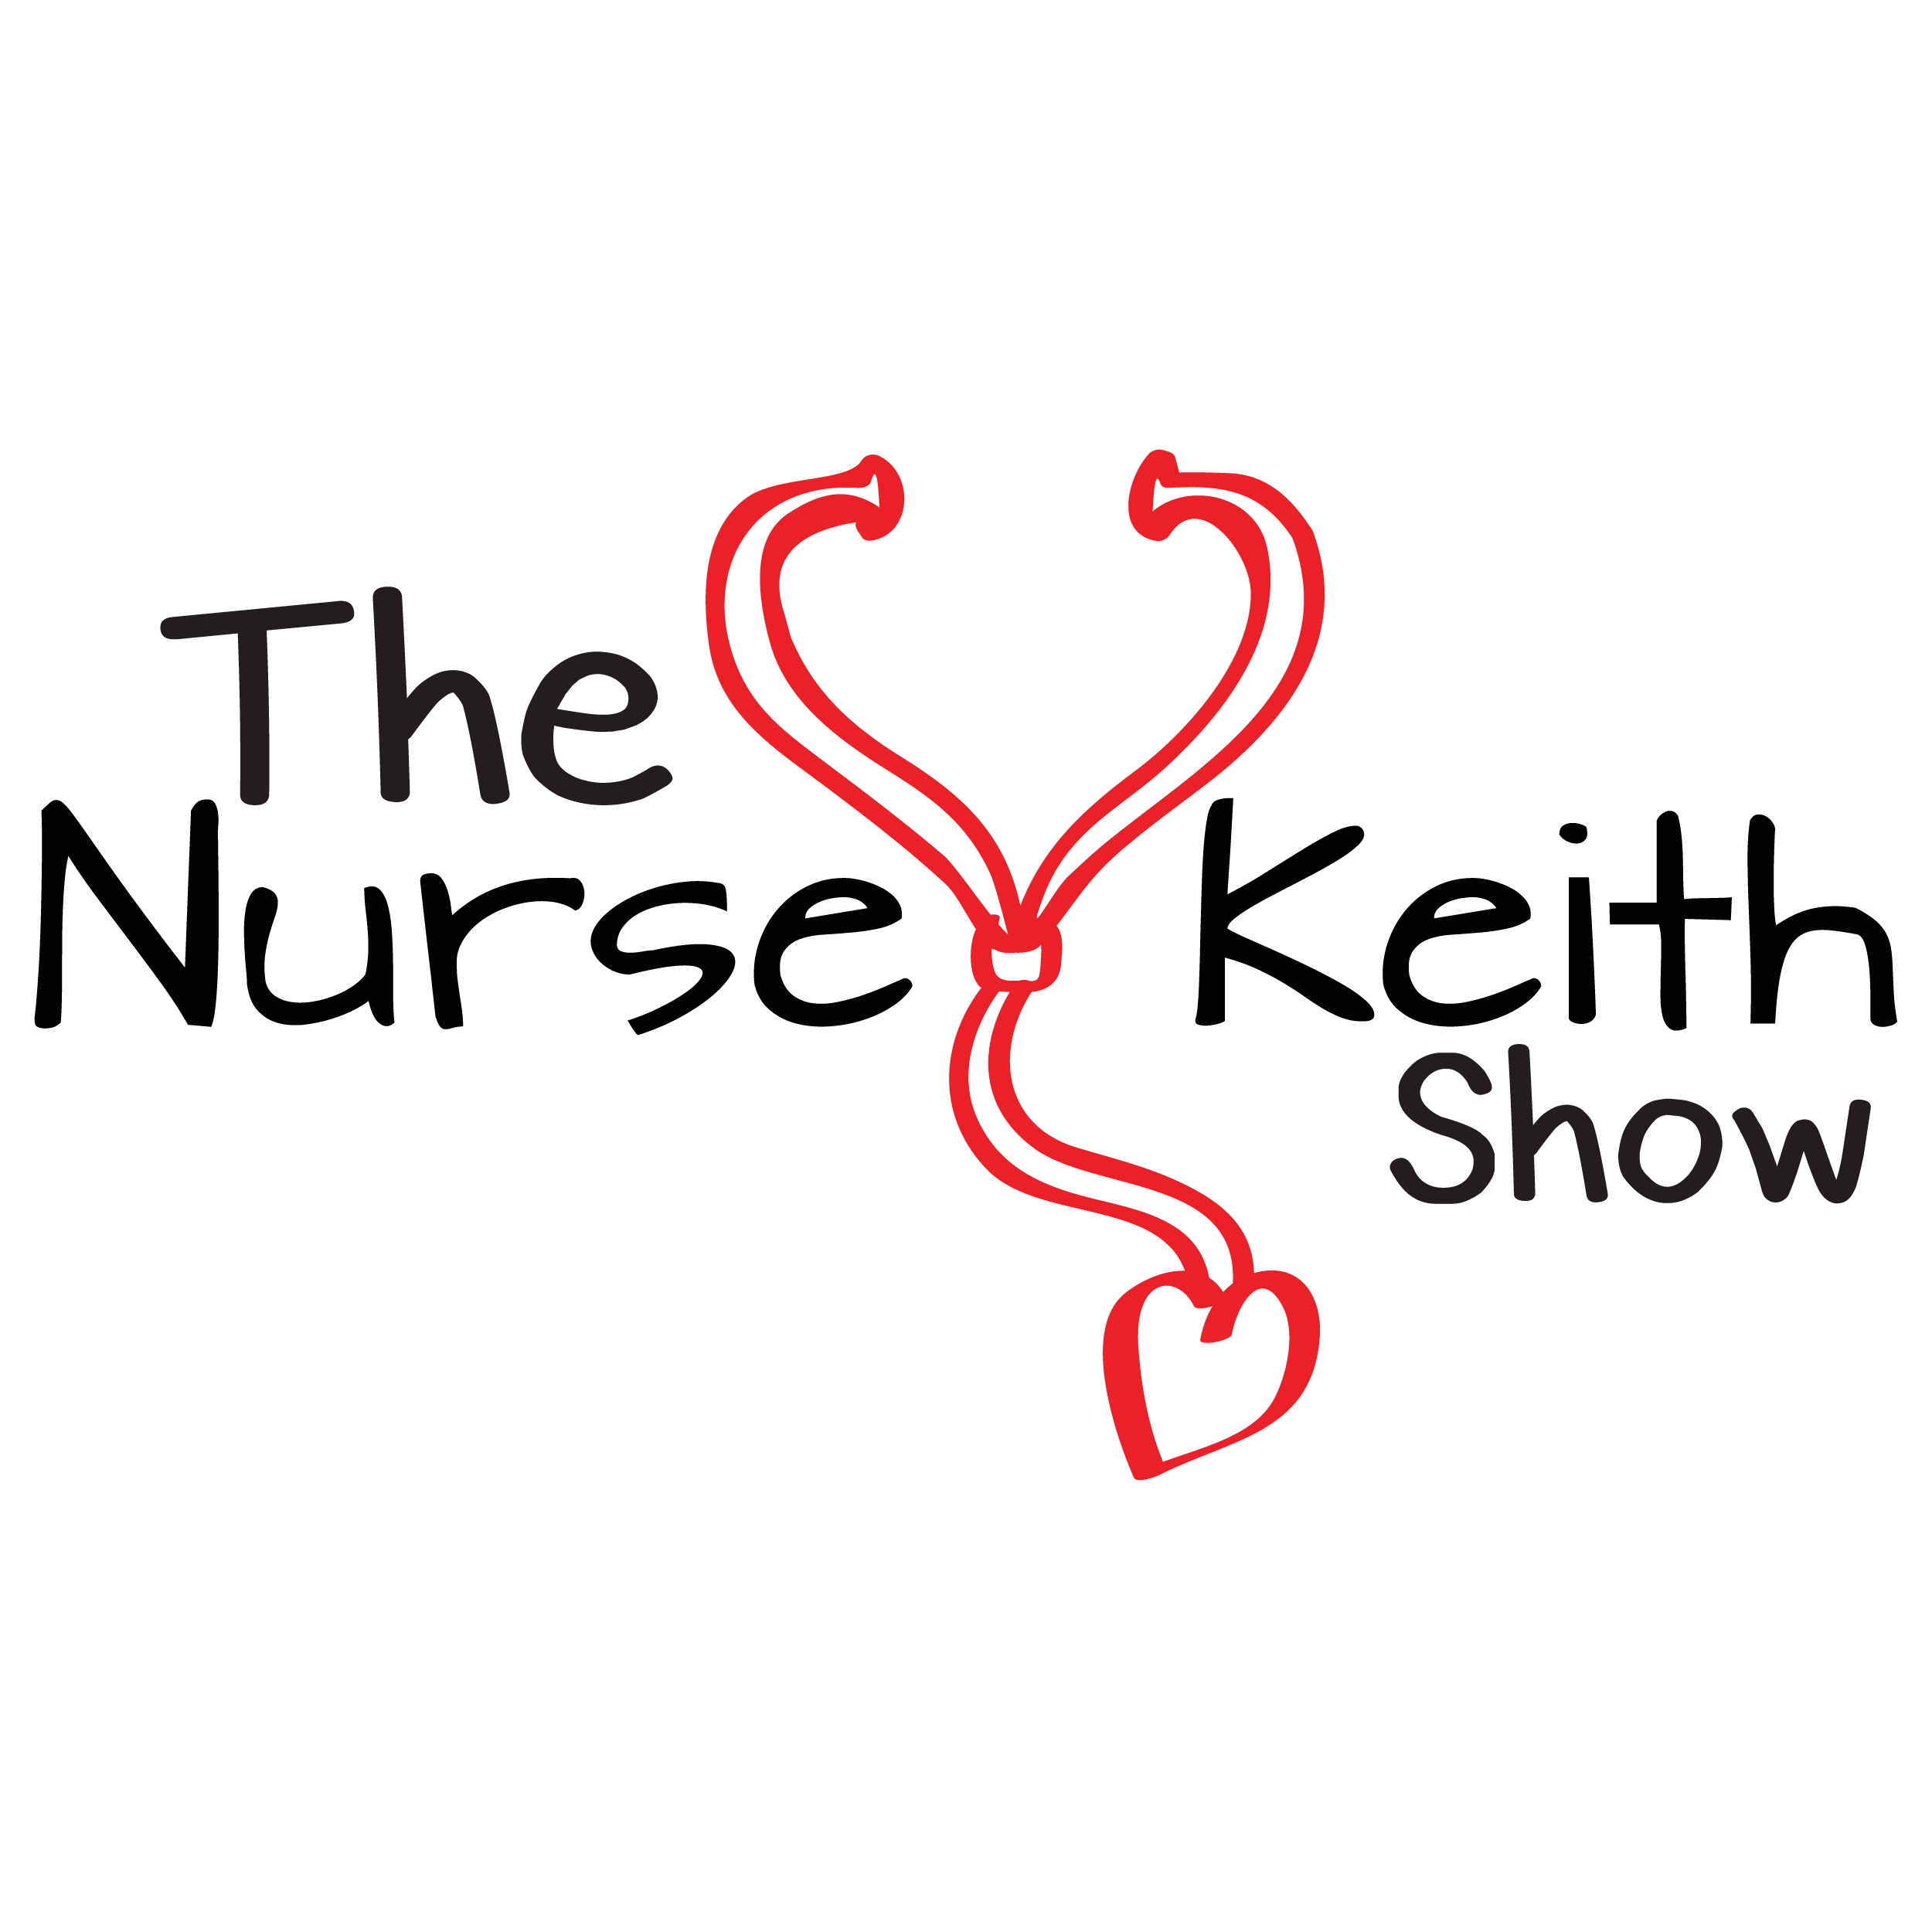 The Nurse Keith Show: Creating a Culture of Safety for Employees Struggling with Mental Illness and Substance Use Disorders